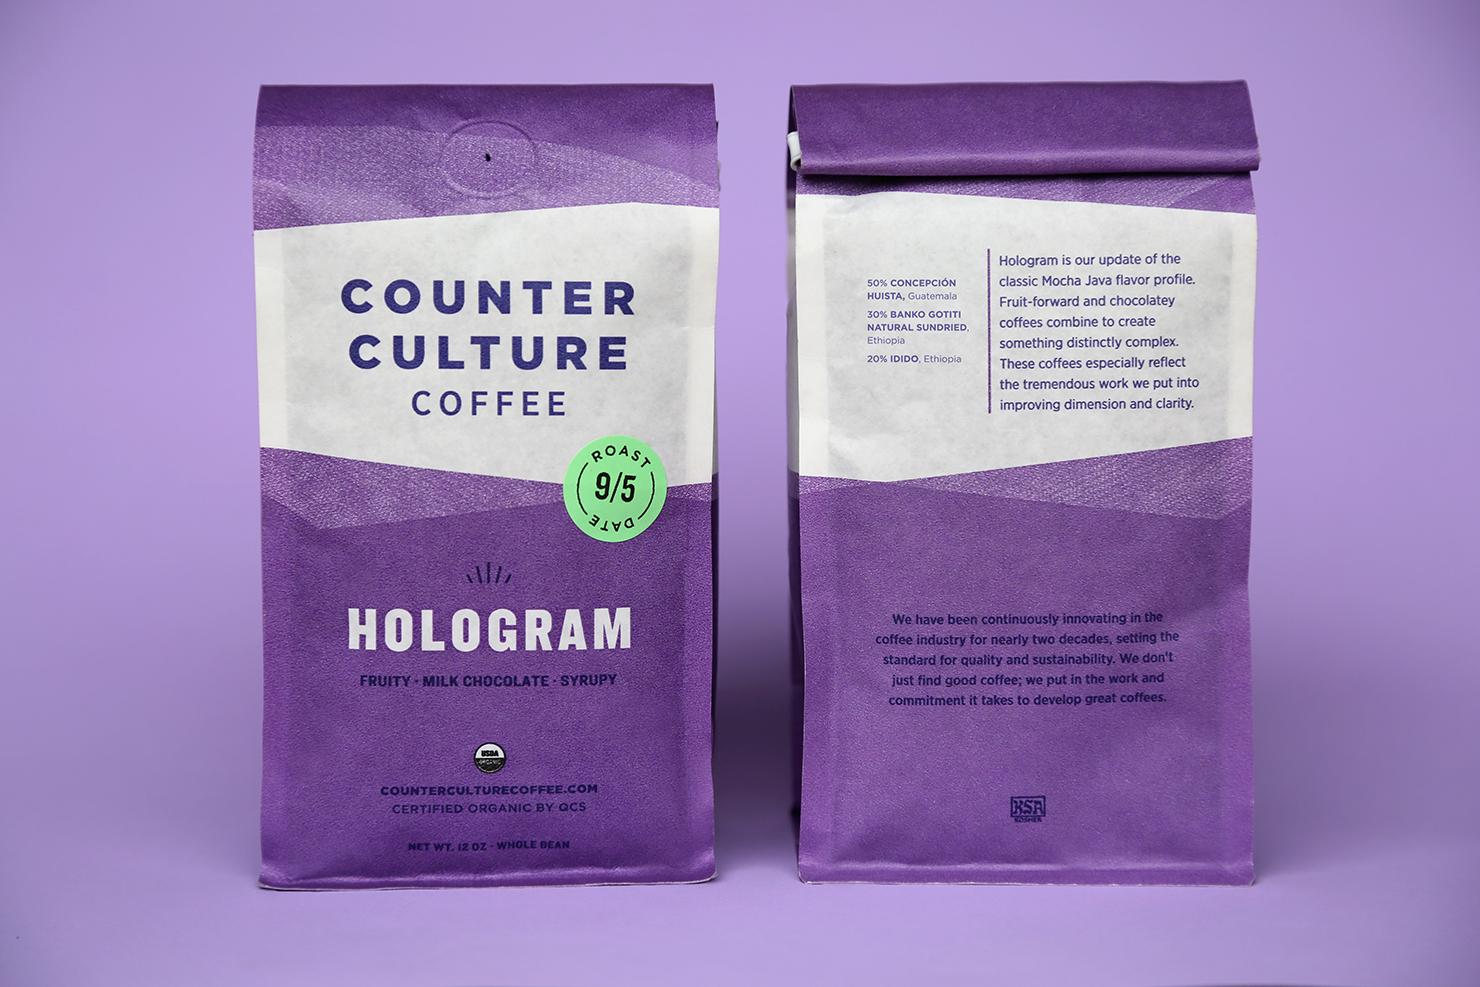 First Look: Counter Culture Coffee Refreshes Lineup With New Design, Names